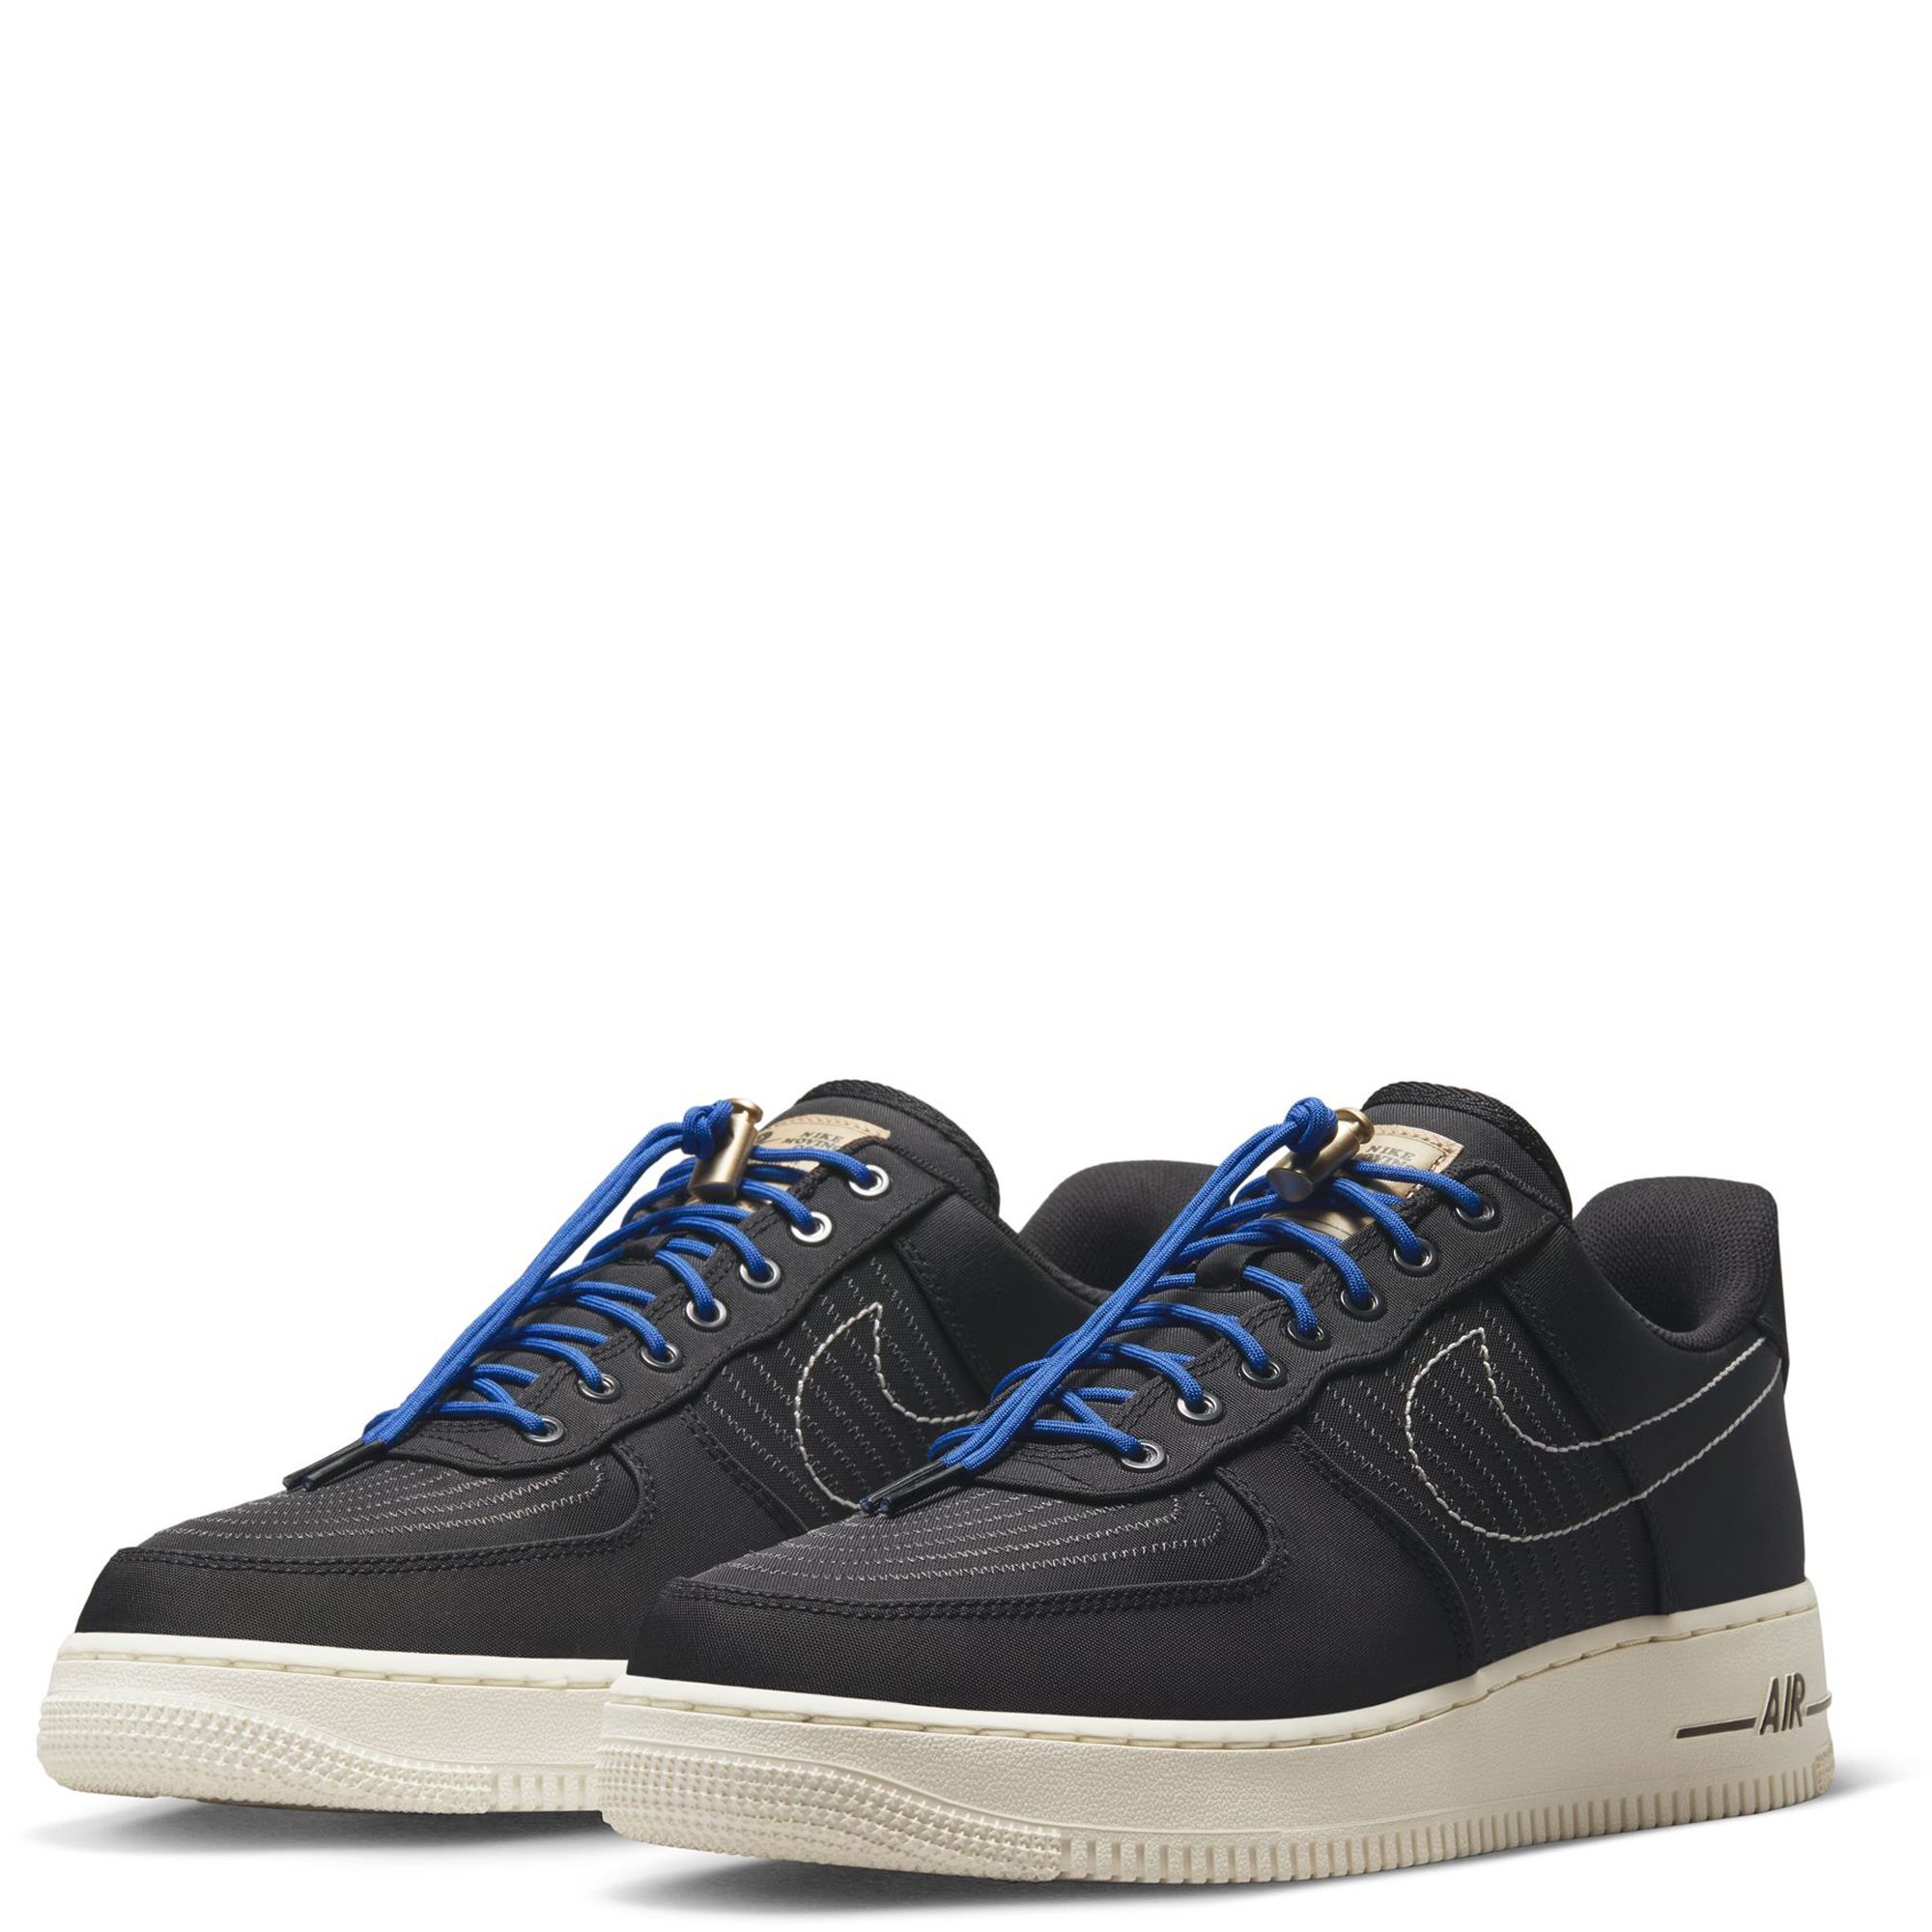 Men's Nike Air Force 1 '07 LV8 SE Reflective Swoosh Casual Shoes